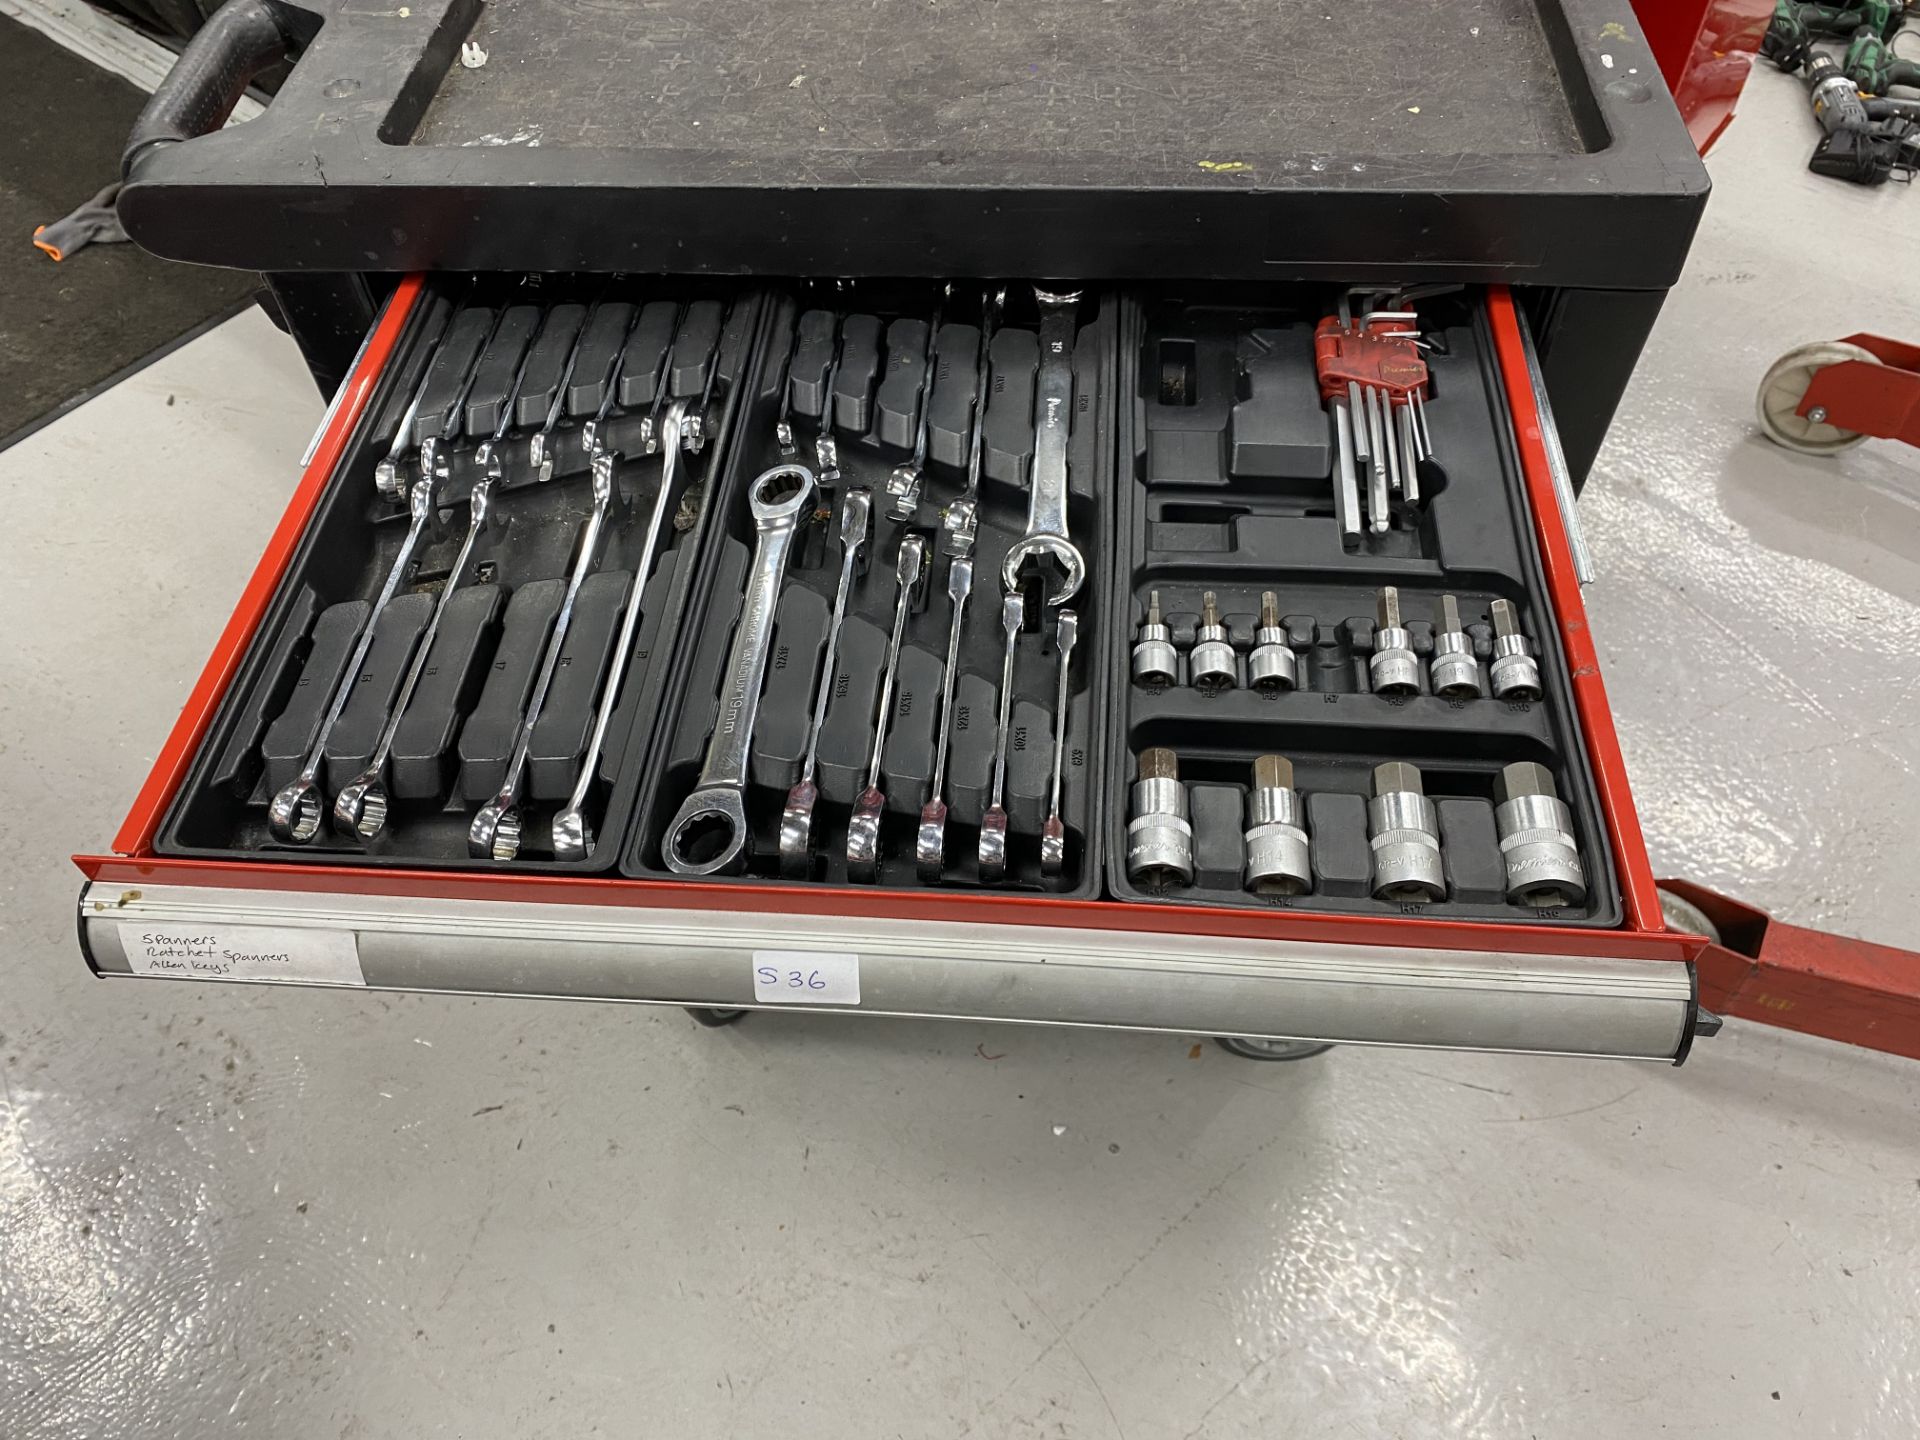 Sealey 10 drawer mobile toolbox including the following tools, rings and open ended spanners 7mm- - Image 2 of 11